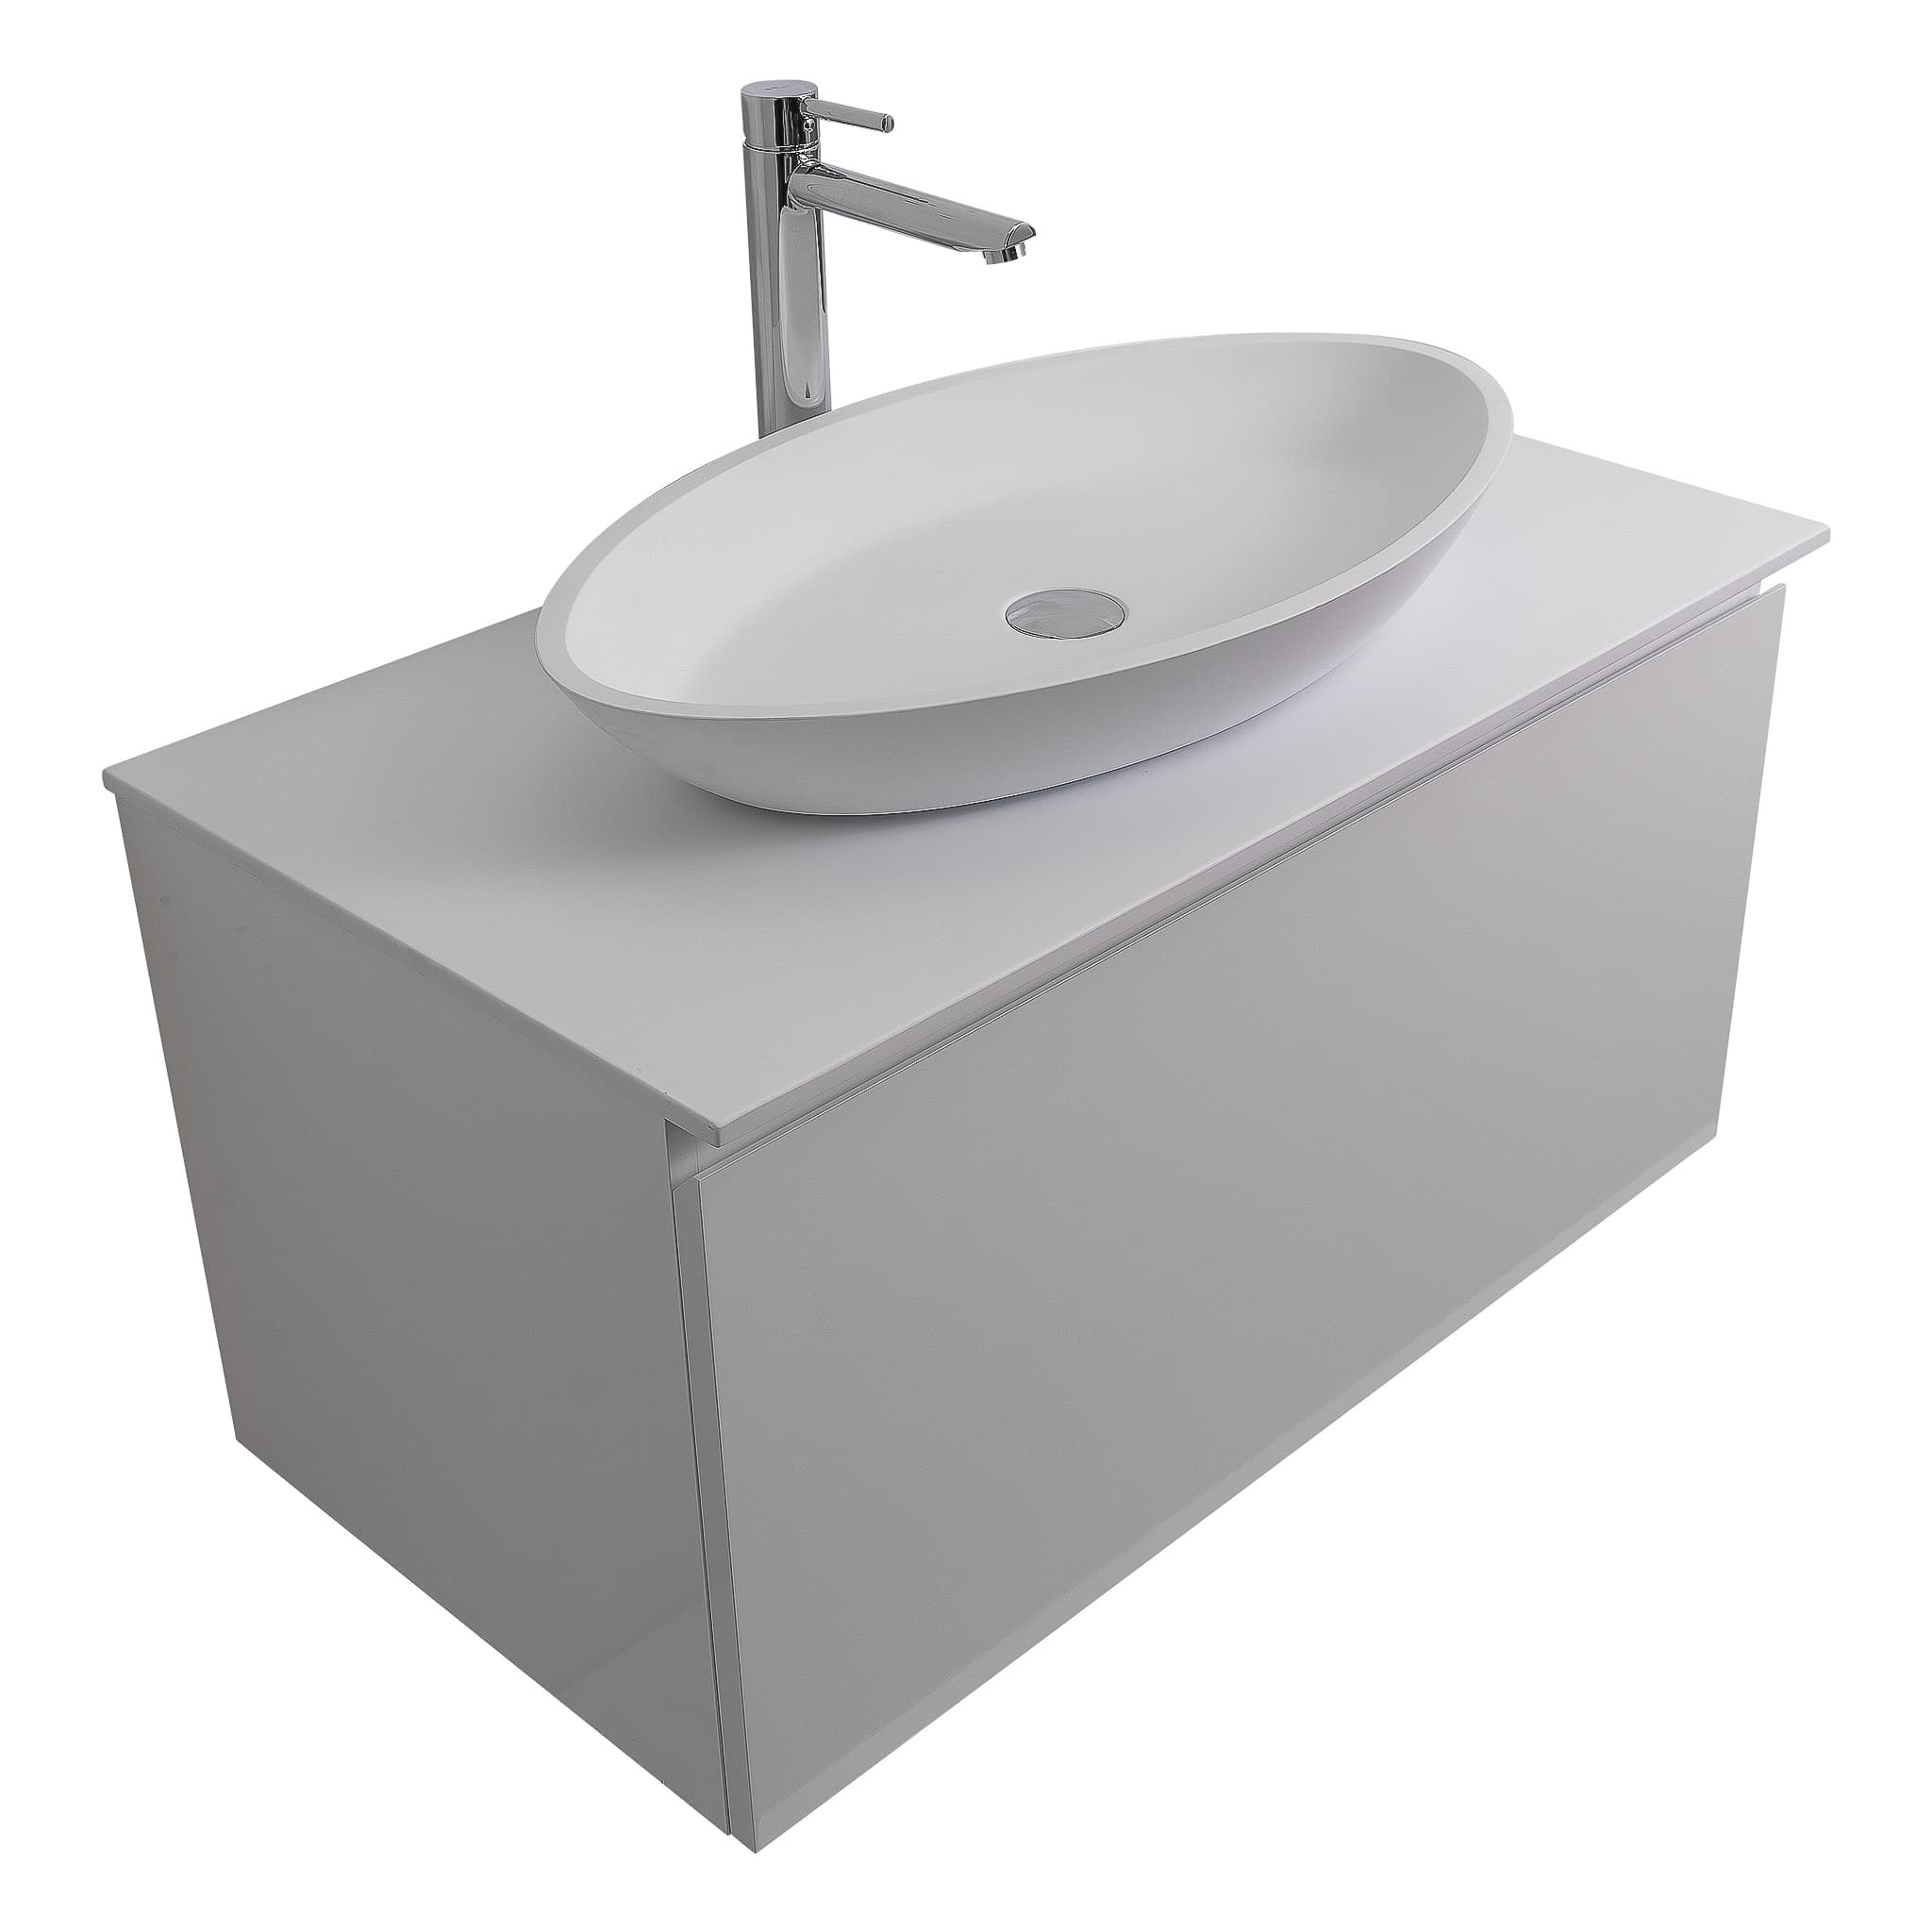 Venice 31.5 White High Gloss Cabinet, Solid Surface Flat White Counter And Oval Solid Surface White Basin 1305, Wall Mounted Modern Vanity Set